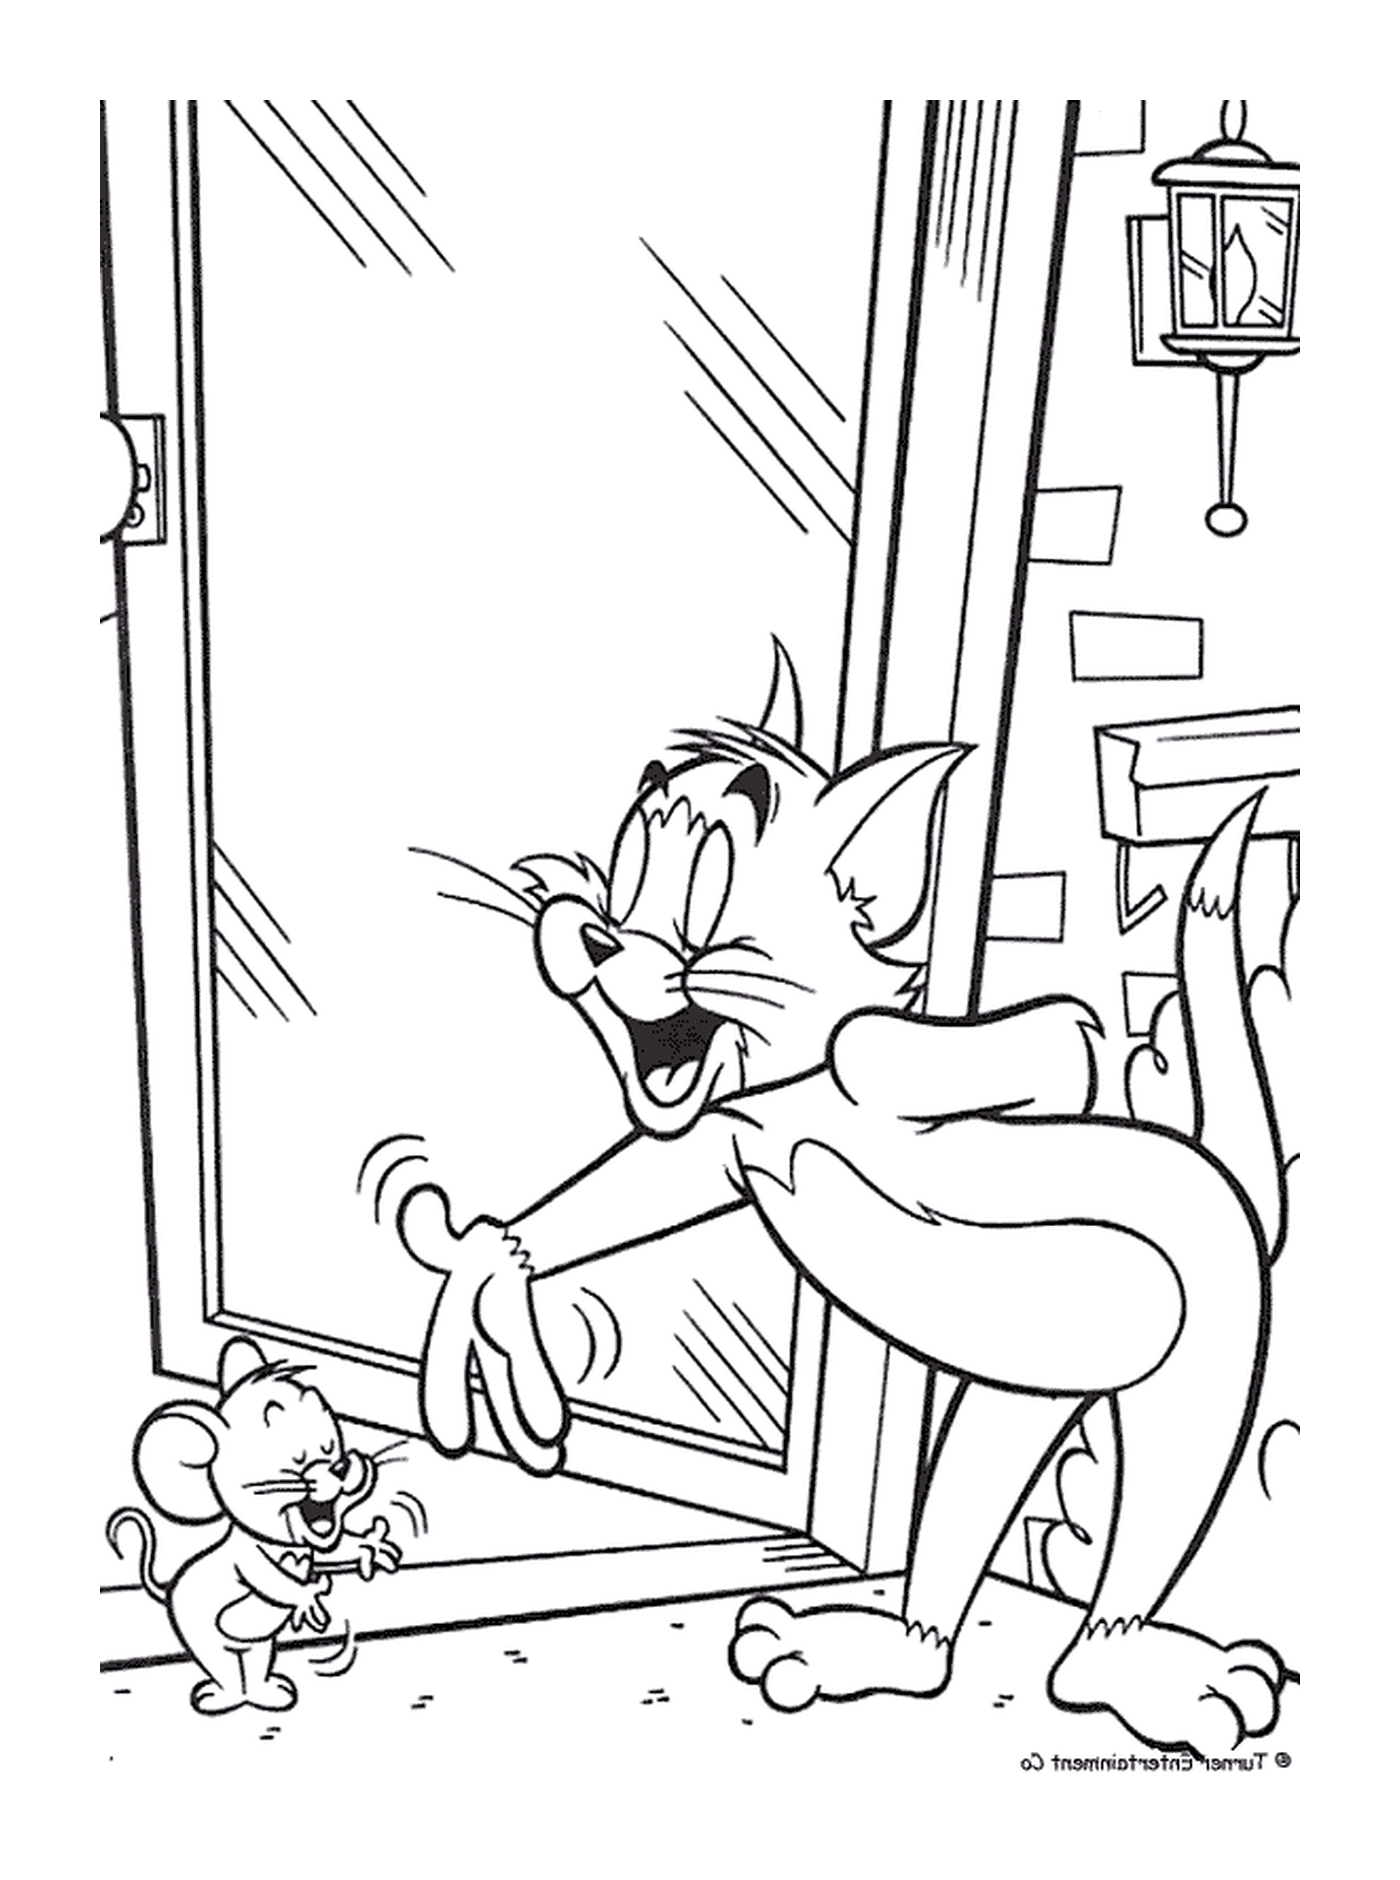  Tom and Jerry greet each other 